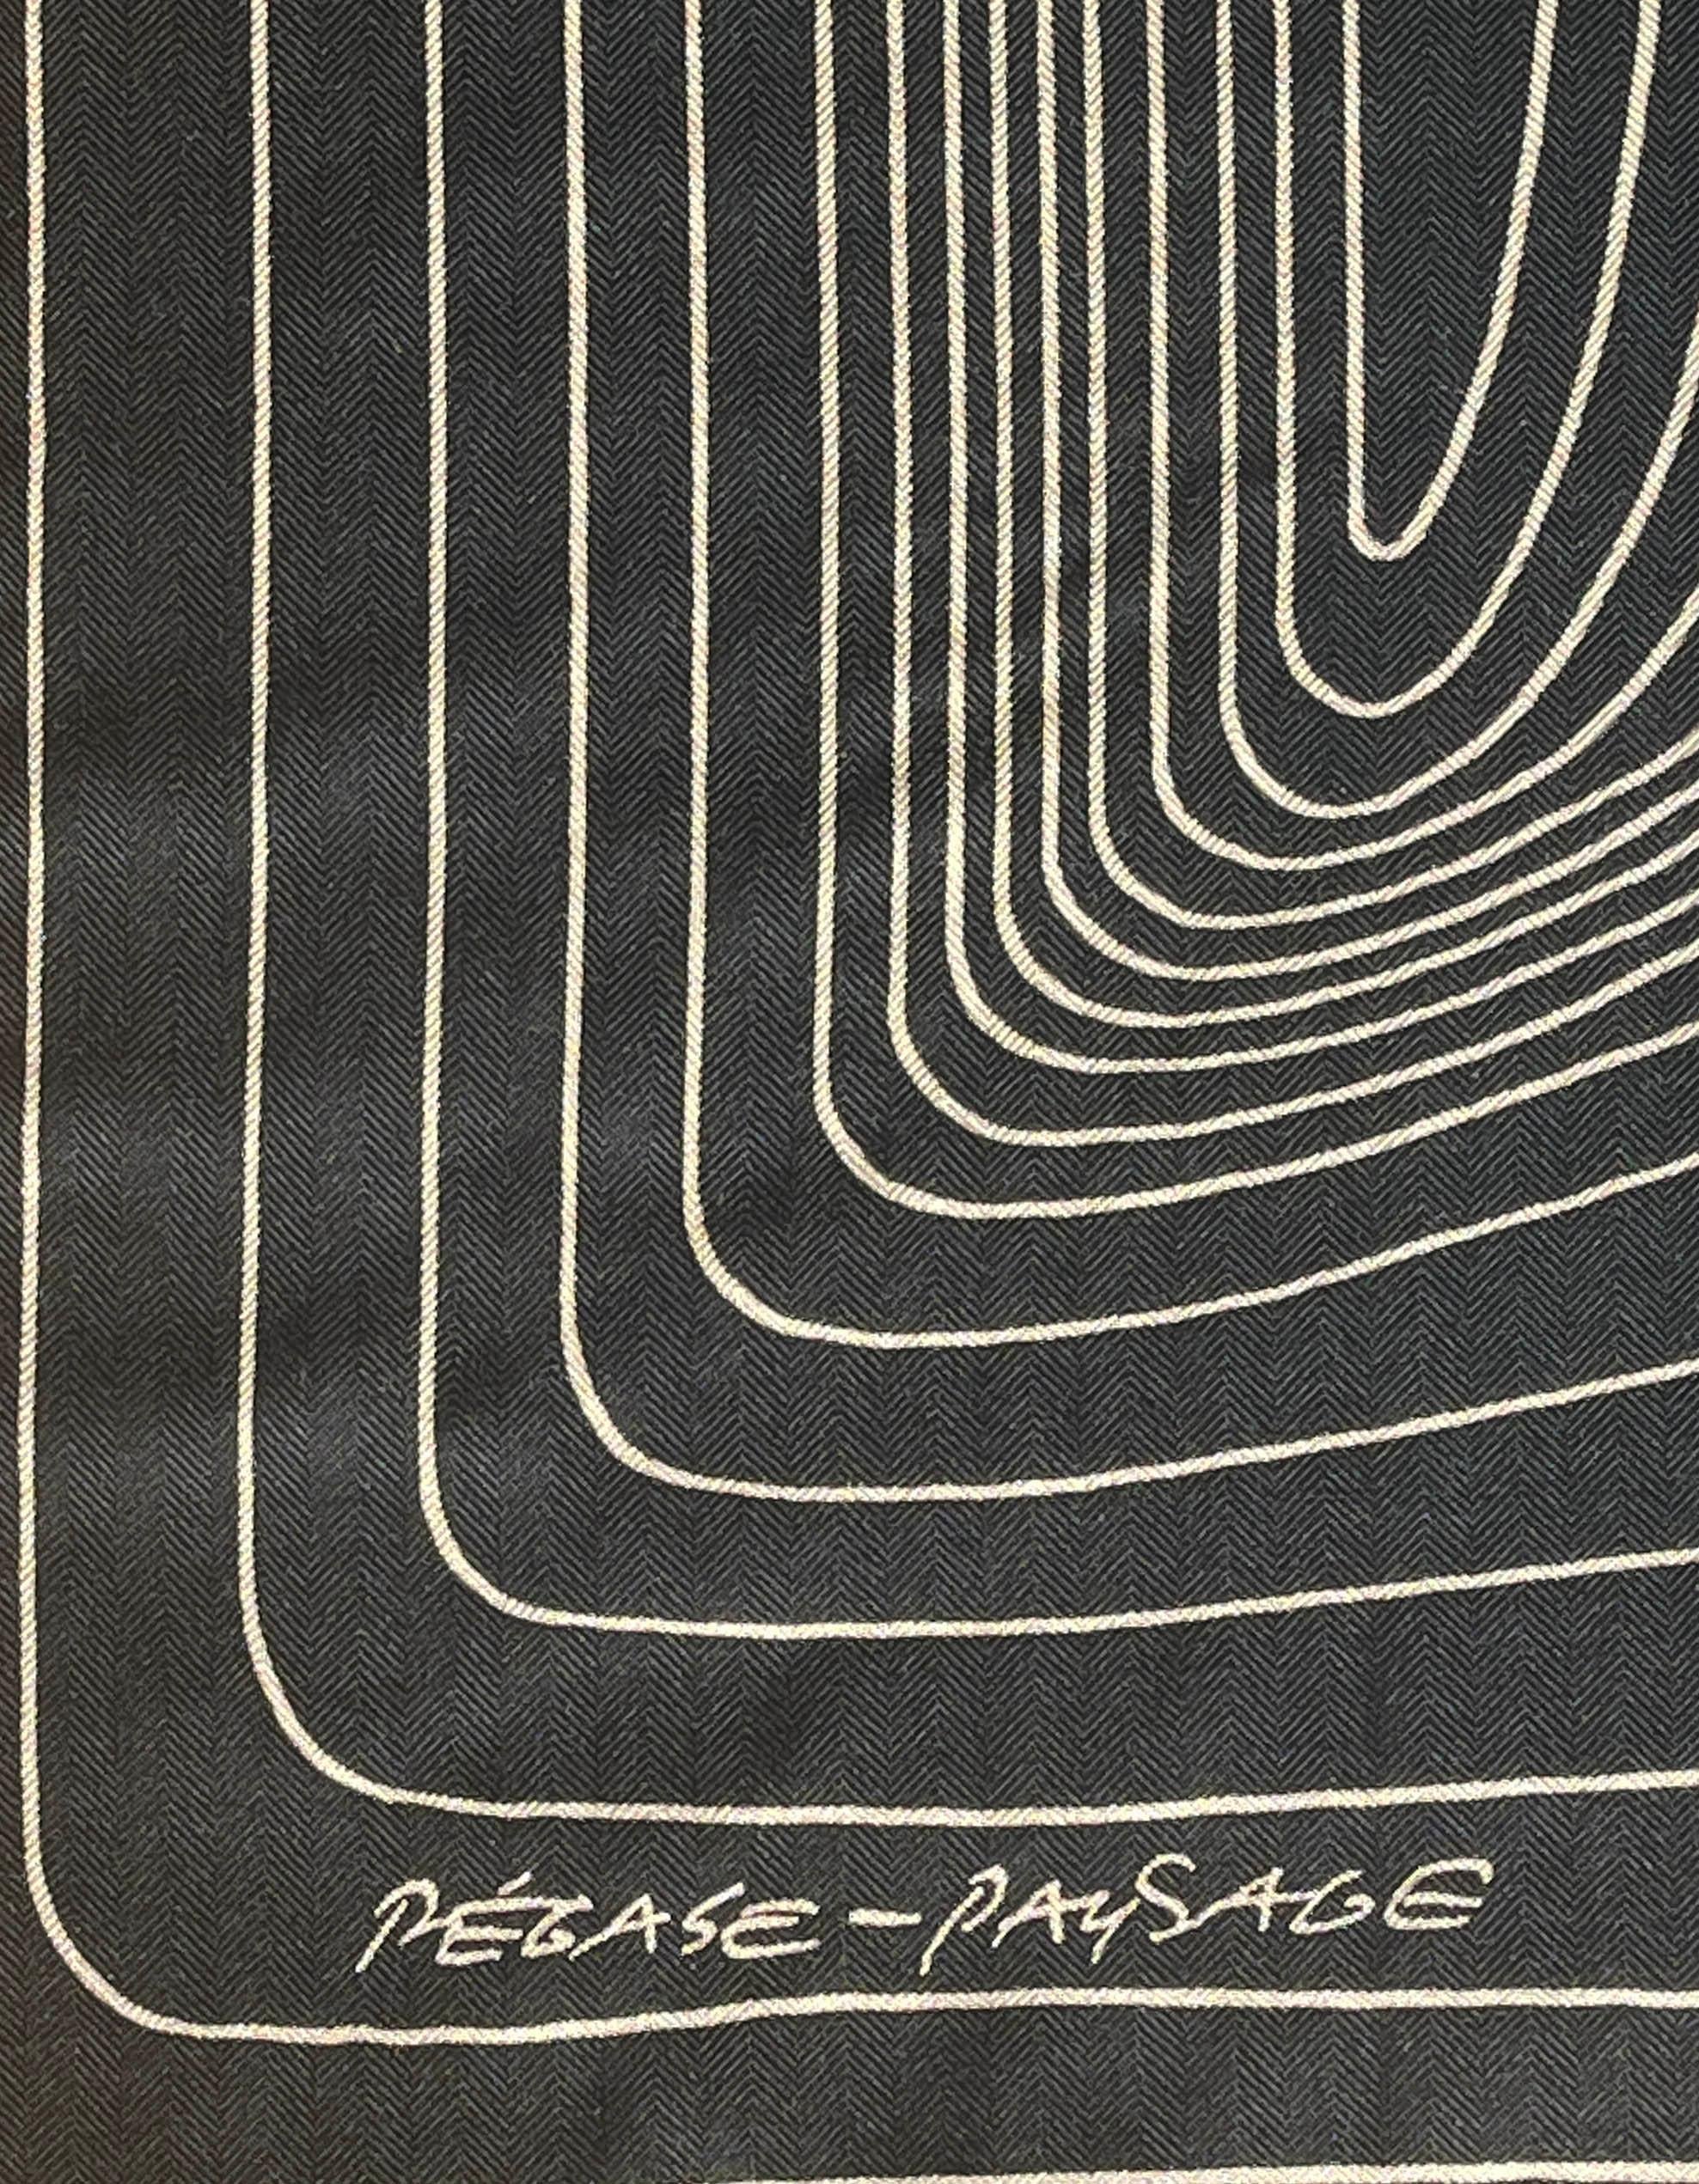 Hermes Black Beige Pegase Paysage 140 Silk Cashmere Shawl. Designed by Christian Renonciat.  Please note,  this item was purchased at a Hermes sale and the tag is stamped with an 